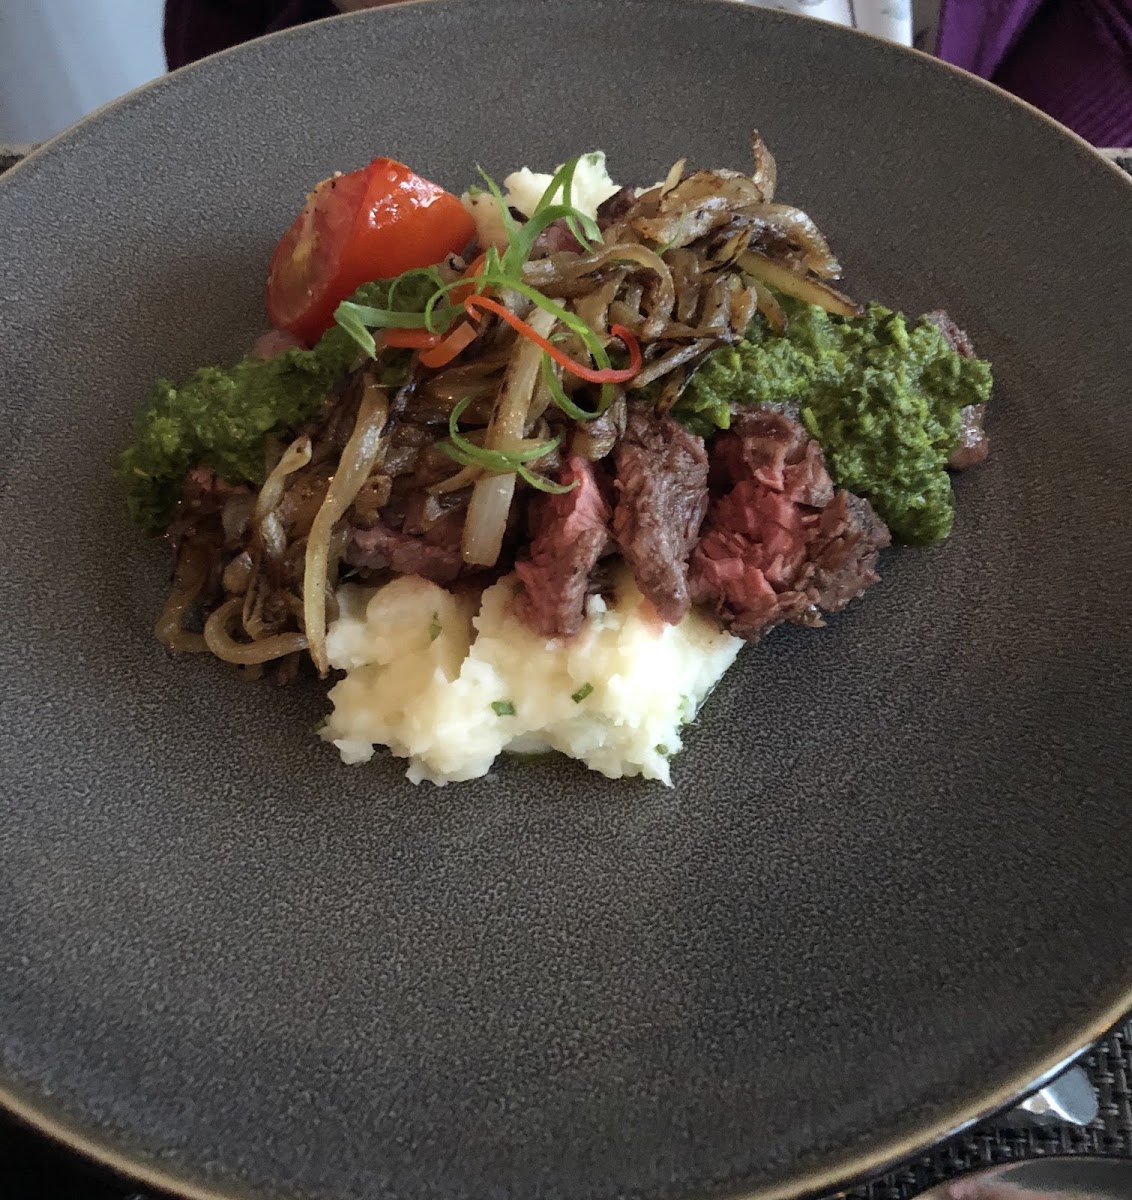 Hanger Steak with Chimchuri Sauce and carmalized onions (instead of crispy onions) with mashed potatoes